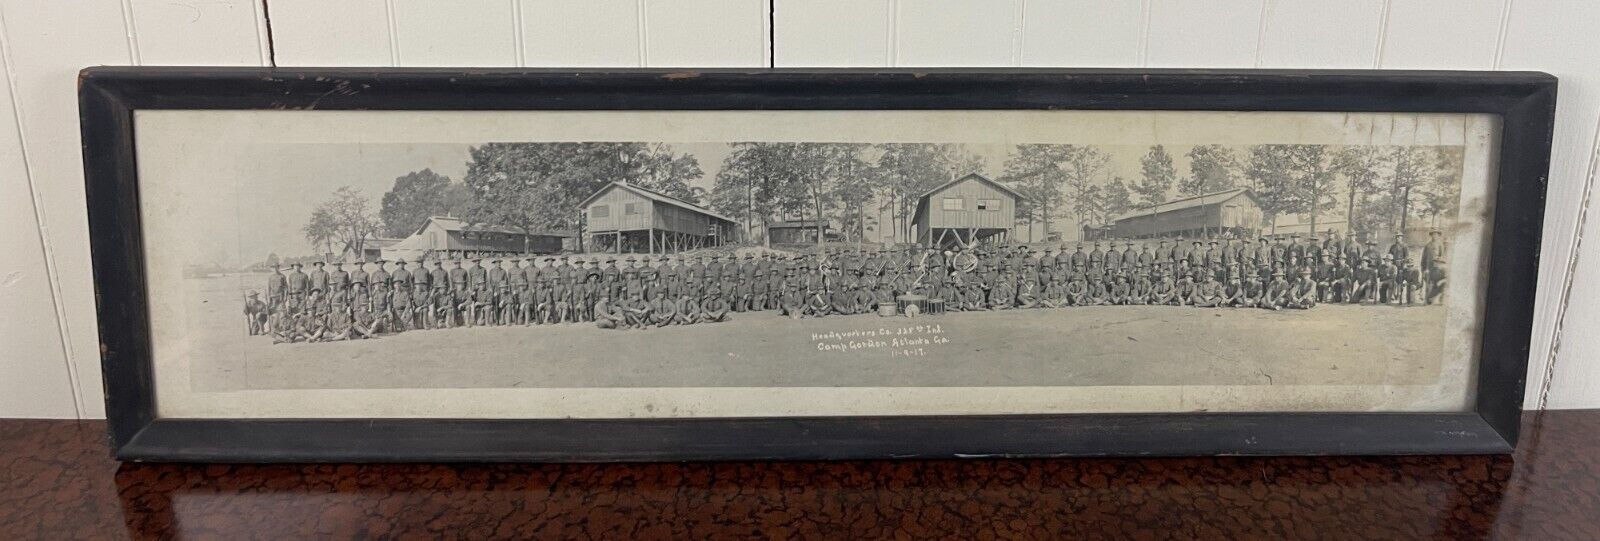 WWI 325th Infantry 82nd Division 1917 Antique Framed Panoramic Photo Camp Gordon